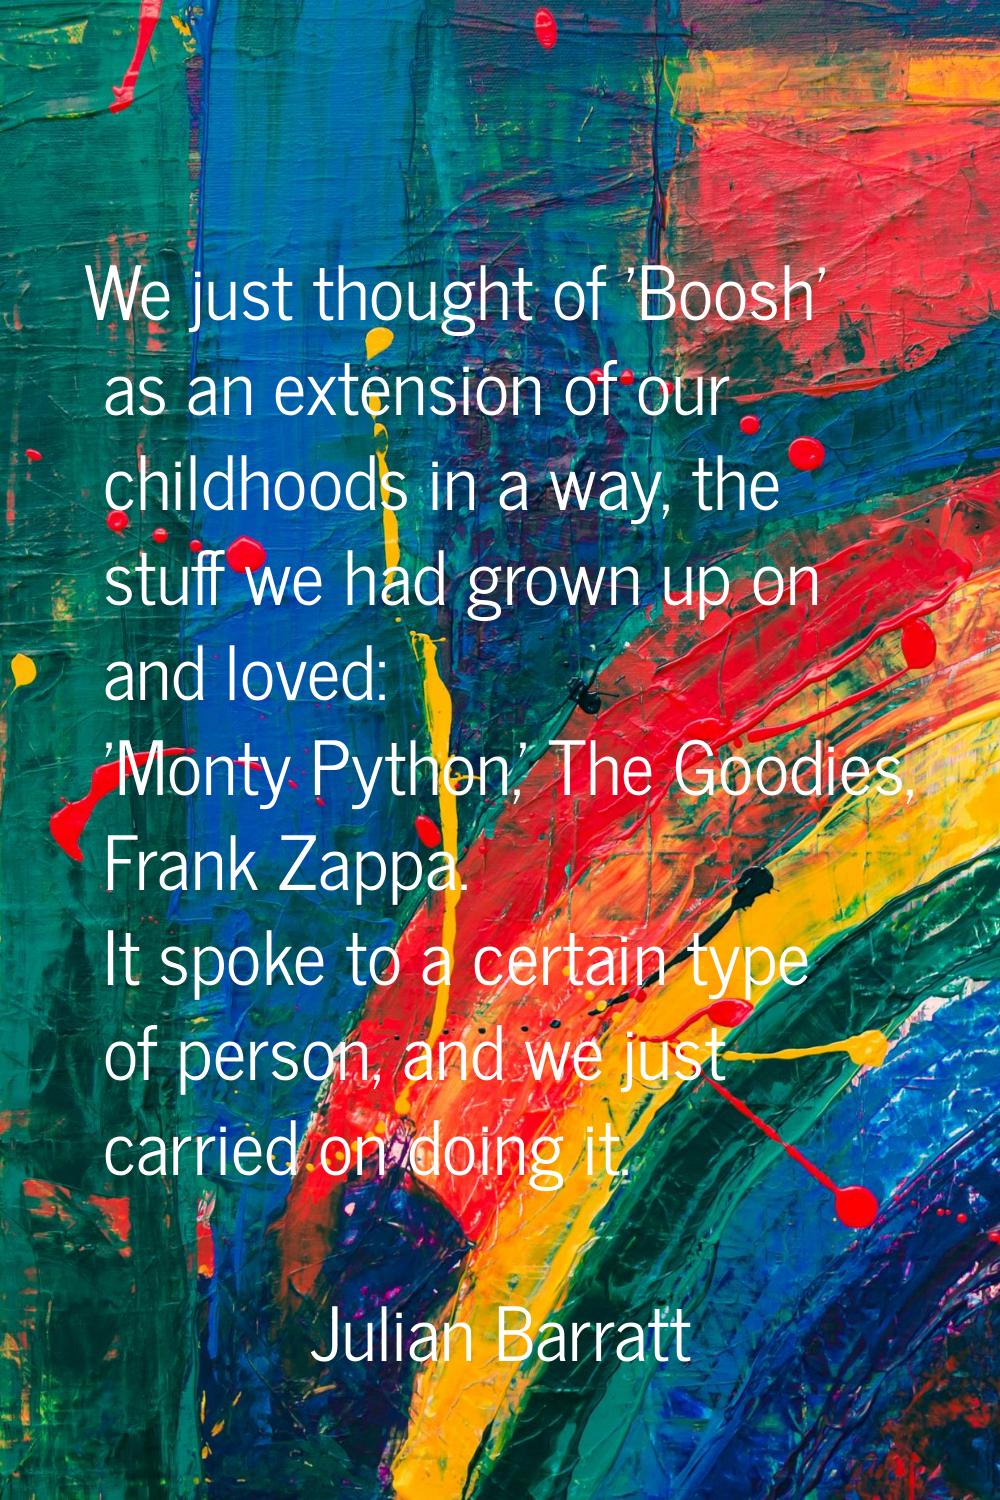 We just thought of 'Boosh' as an extension of our childhoods in a way, the stuff we had grown up on